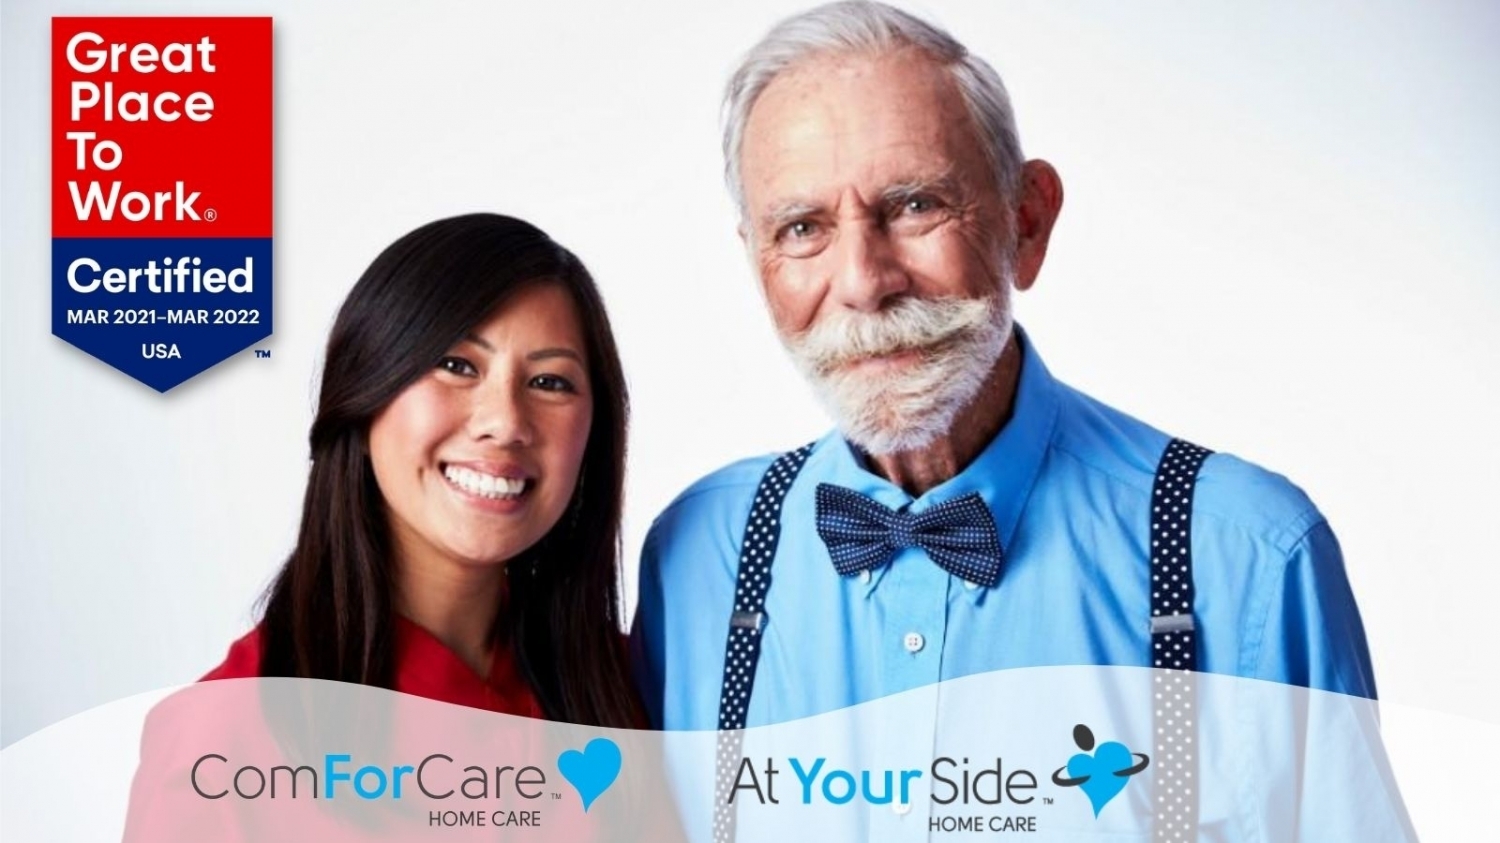 At Your Side Home Care is a Great Place to Work!